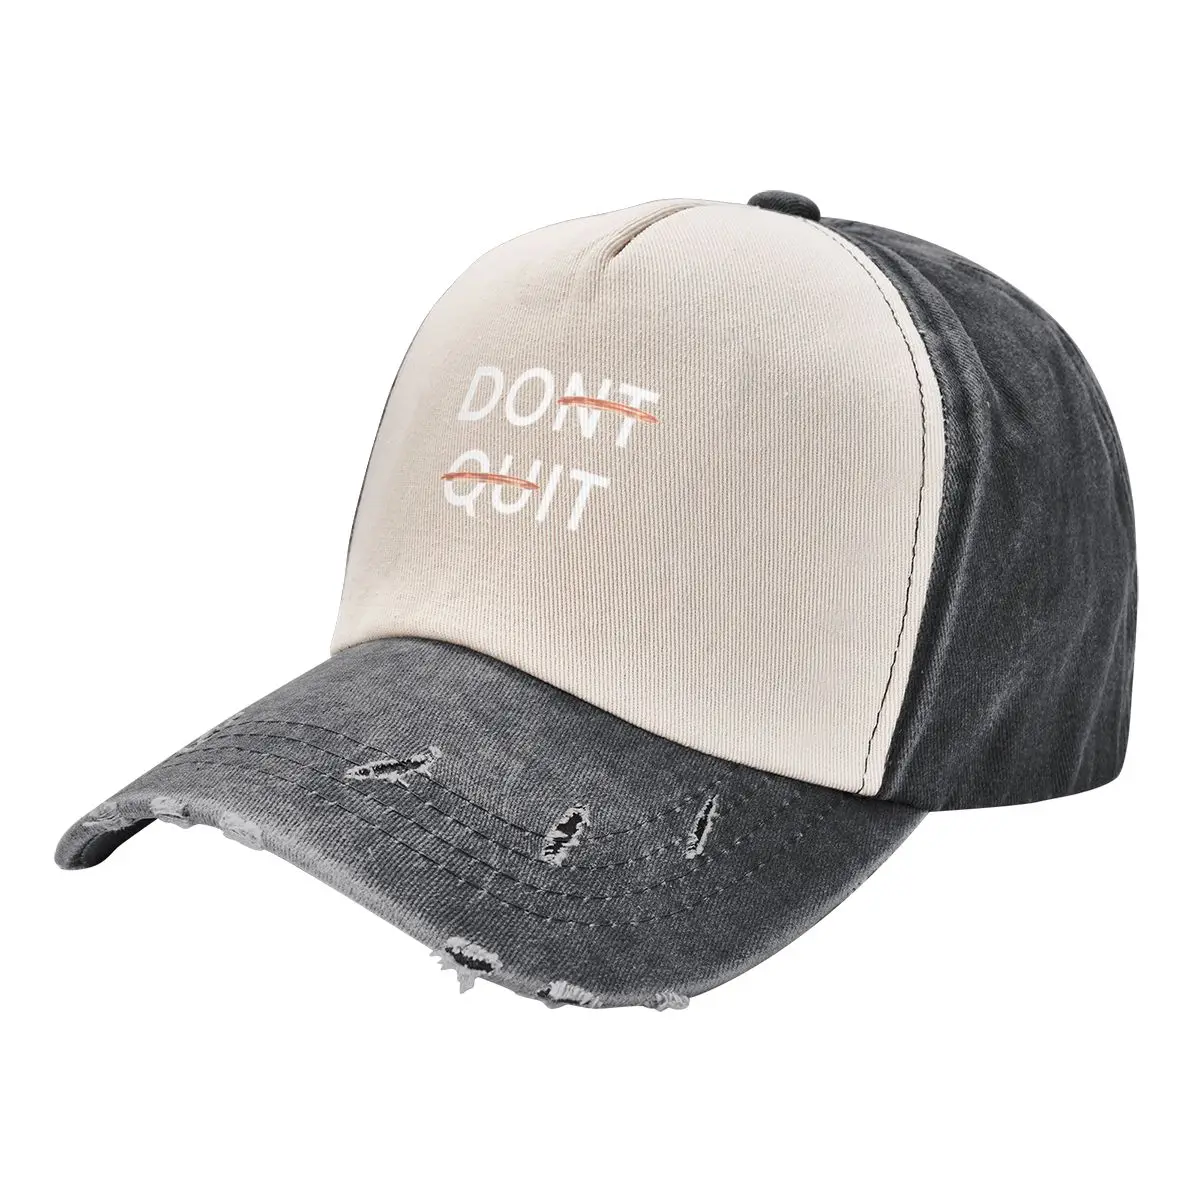 

Do it don’t quit quote with simple text design Baseball Cap Hat Luxury Brand sun hat Golf Wear Women's Men's